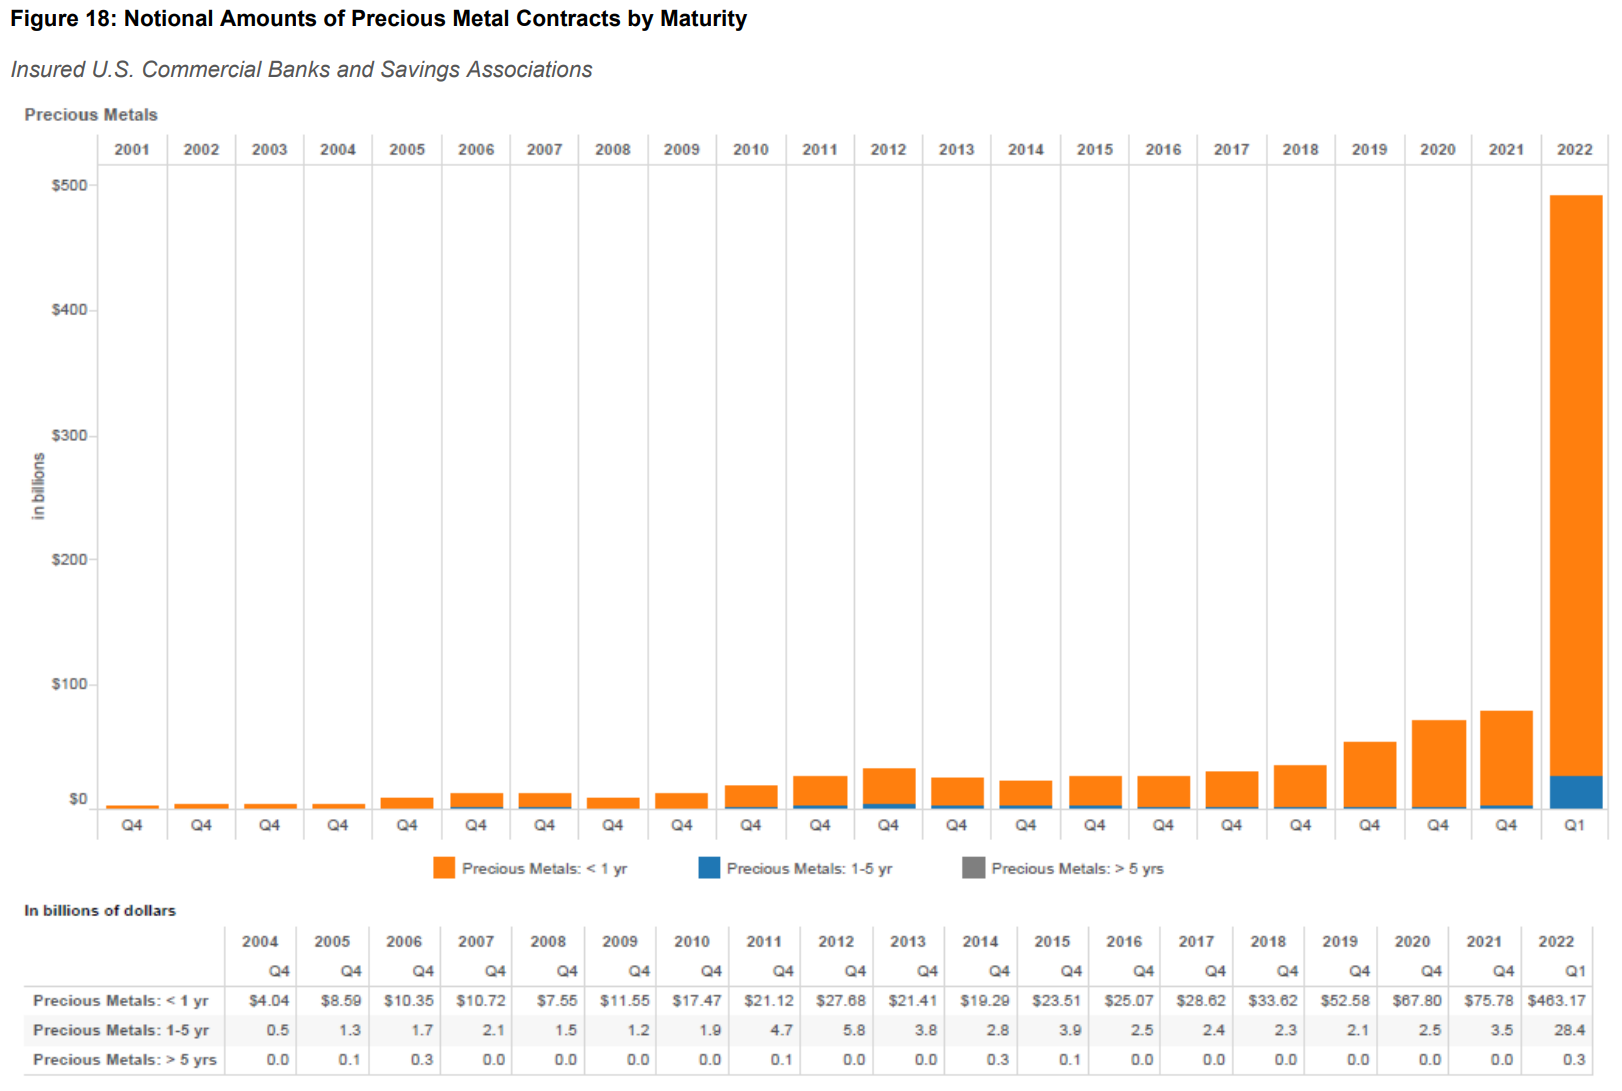 National Amounts of precious metal contracts by Maturity